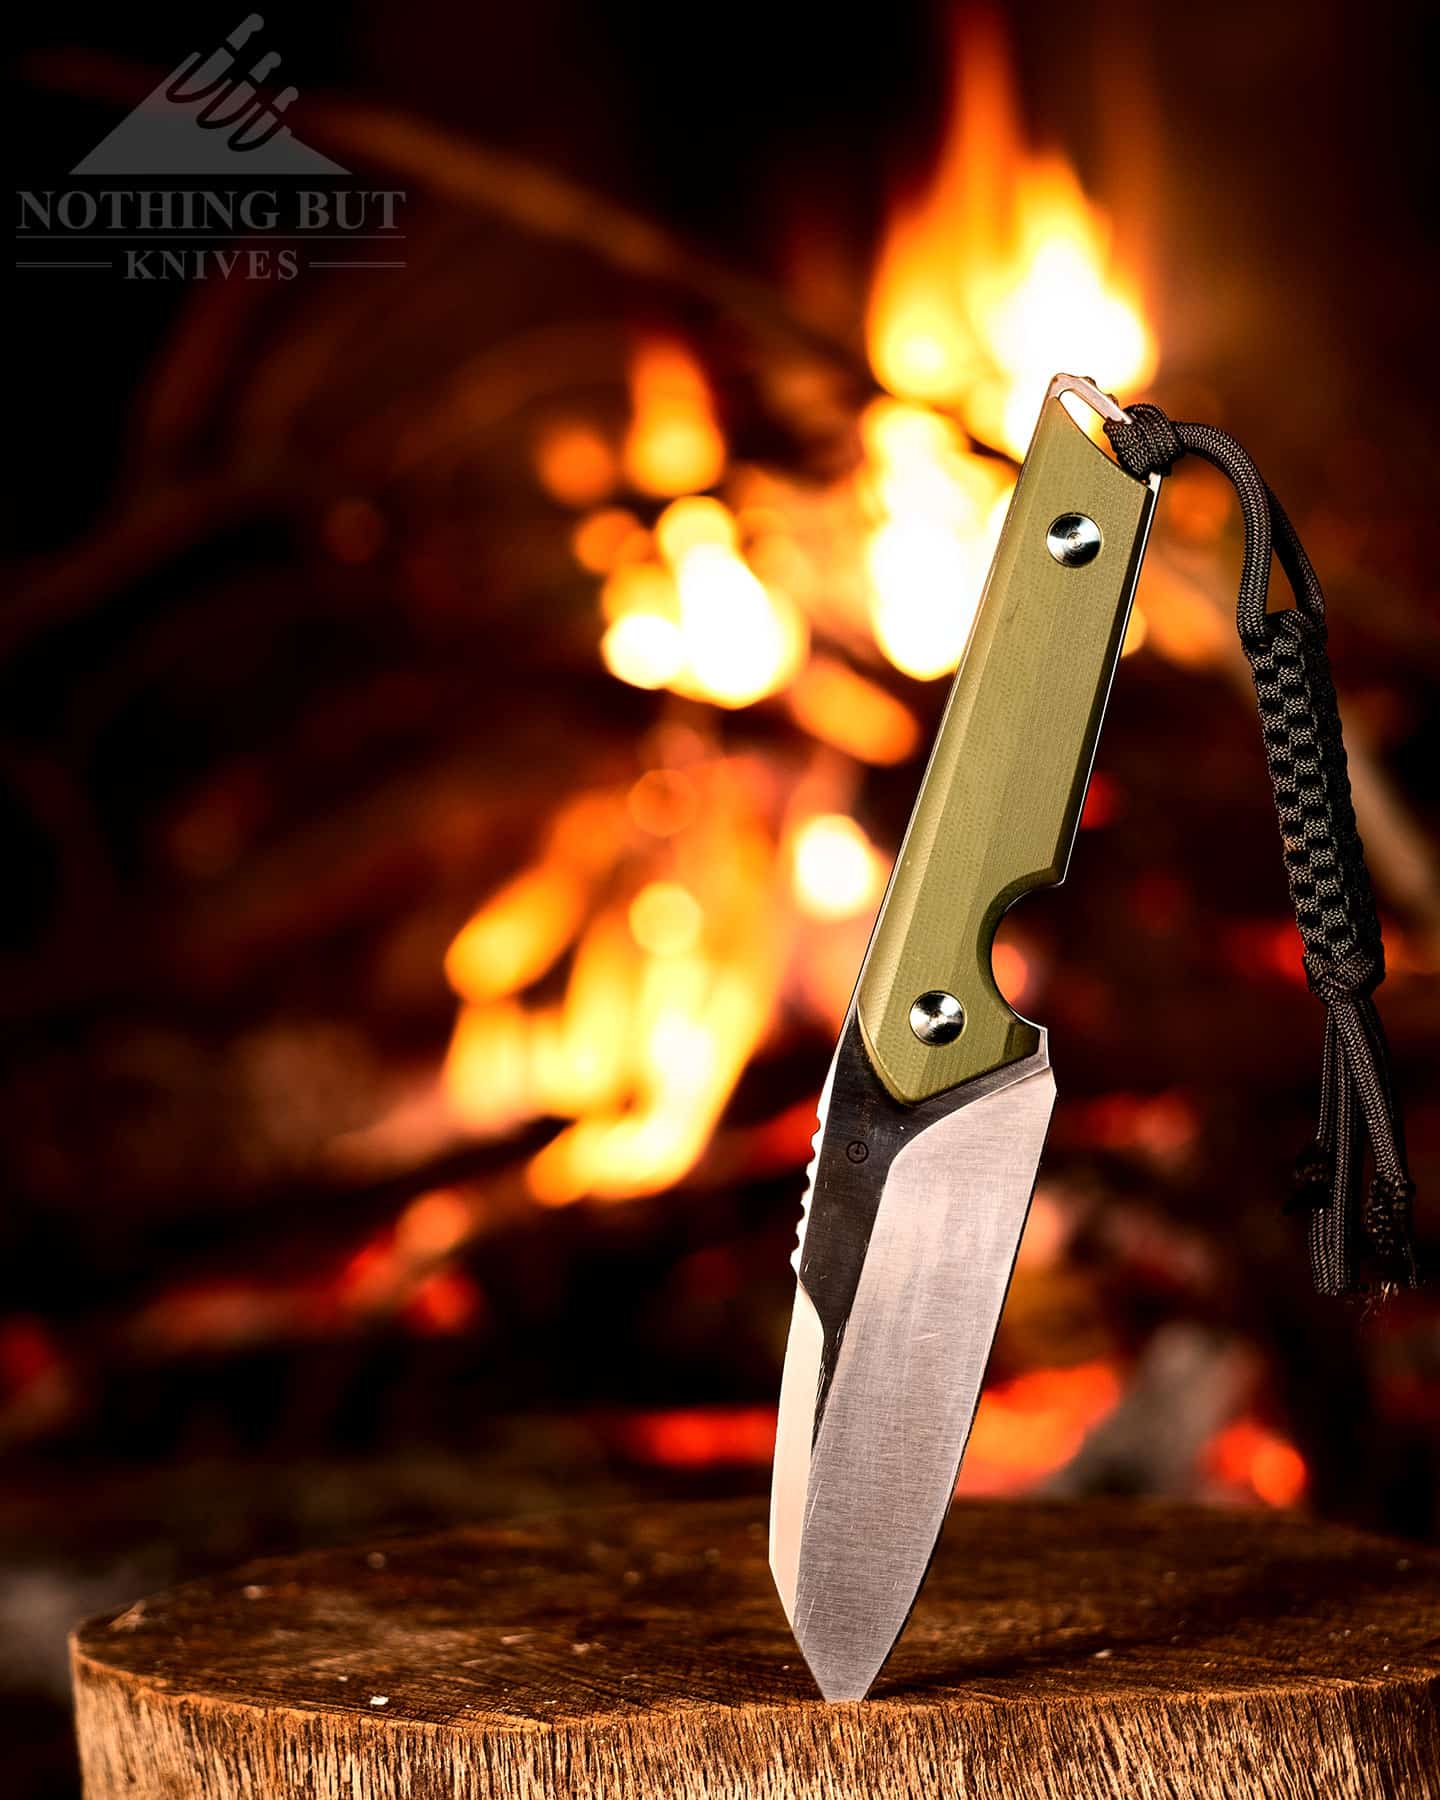 The Civivi Kepler won the award for best fixed blade we wish had different steel. 